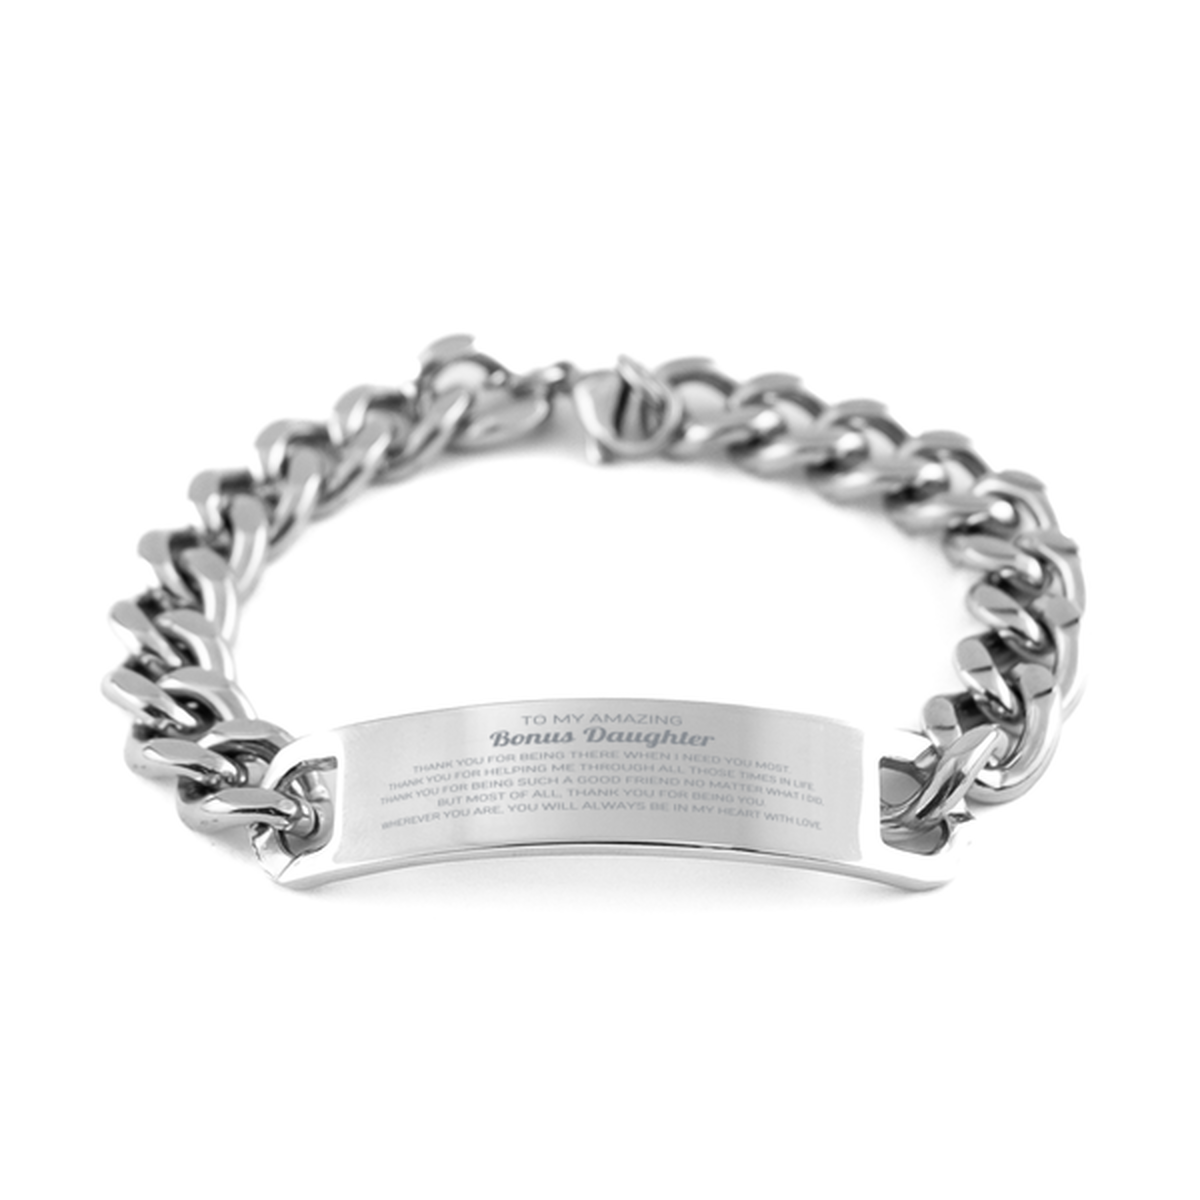 To My Amazing Bonus Daughter Cuban Chain Stainless Steel Bracelet, Thank you for being there, Thank You Gifts For Bonus Daughter, Birthday, Christmas Unique Gifts For Bonus Daughter